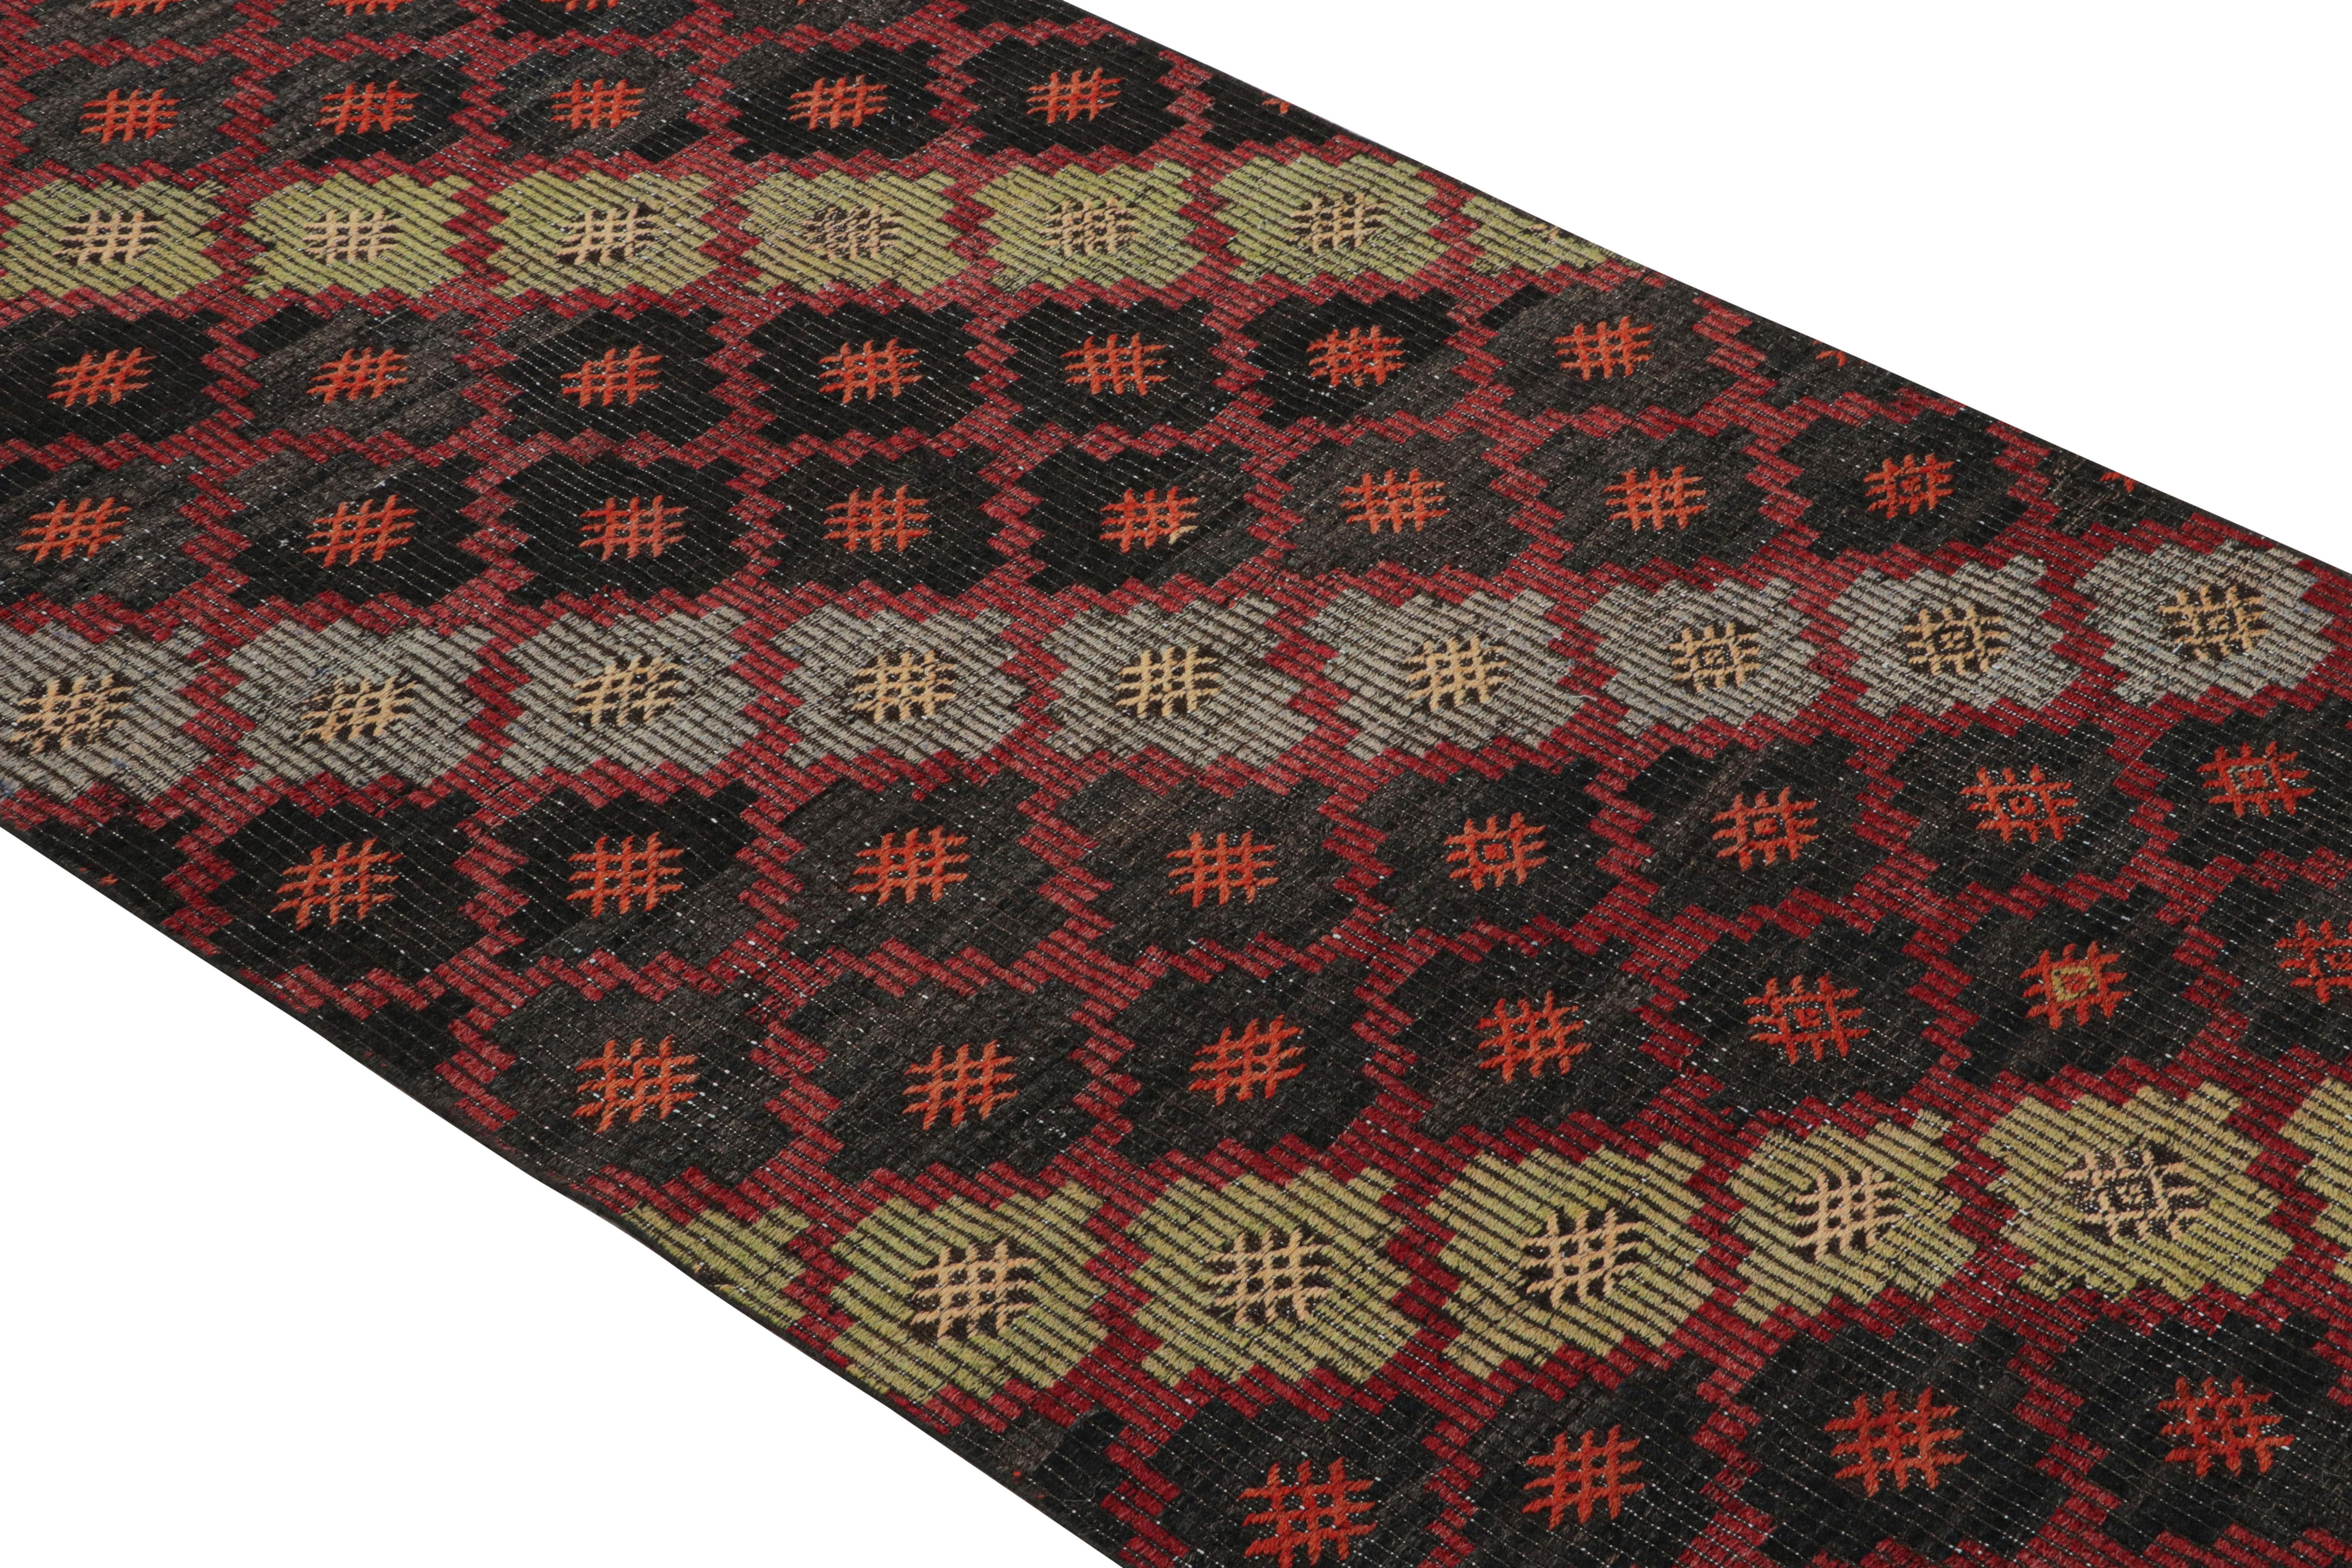 Handwoven in Turkey originating between 1950-1960, this vintage midcentury wool Kilim rug enjoys a meticulous play of embroidery and flat weaving, uncommon and distinguishing of a select line from our recent additions to our collections. This